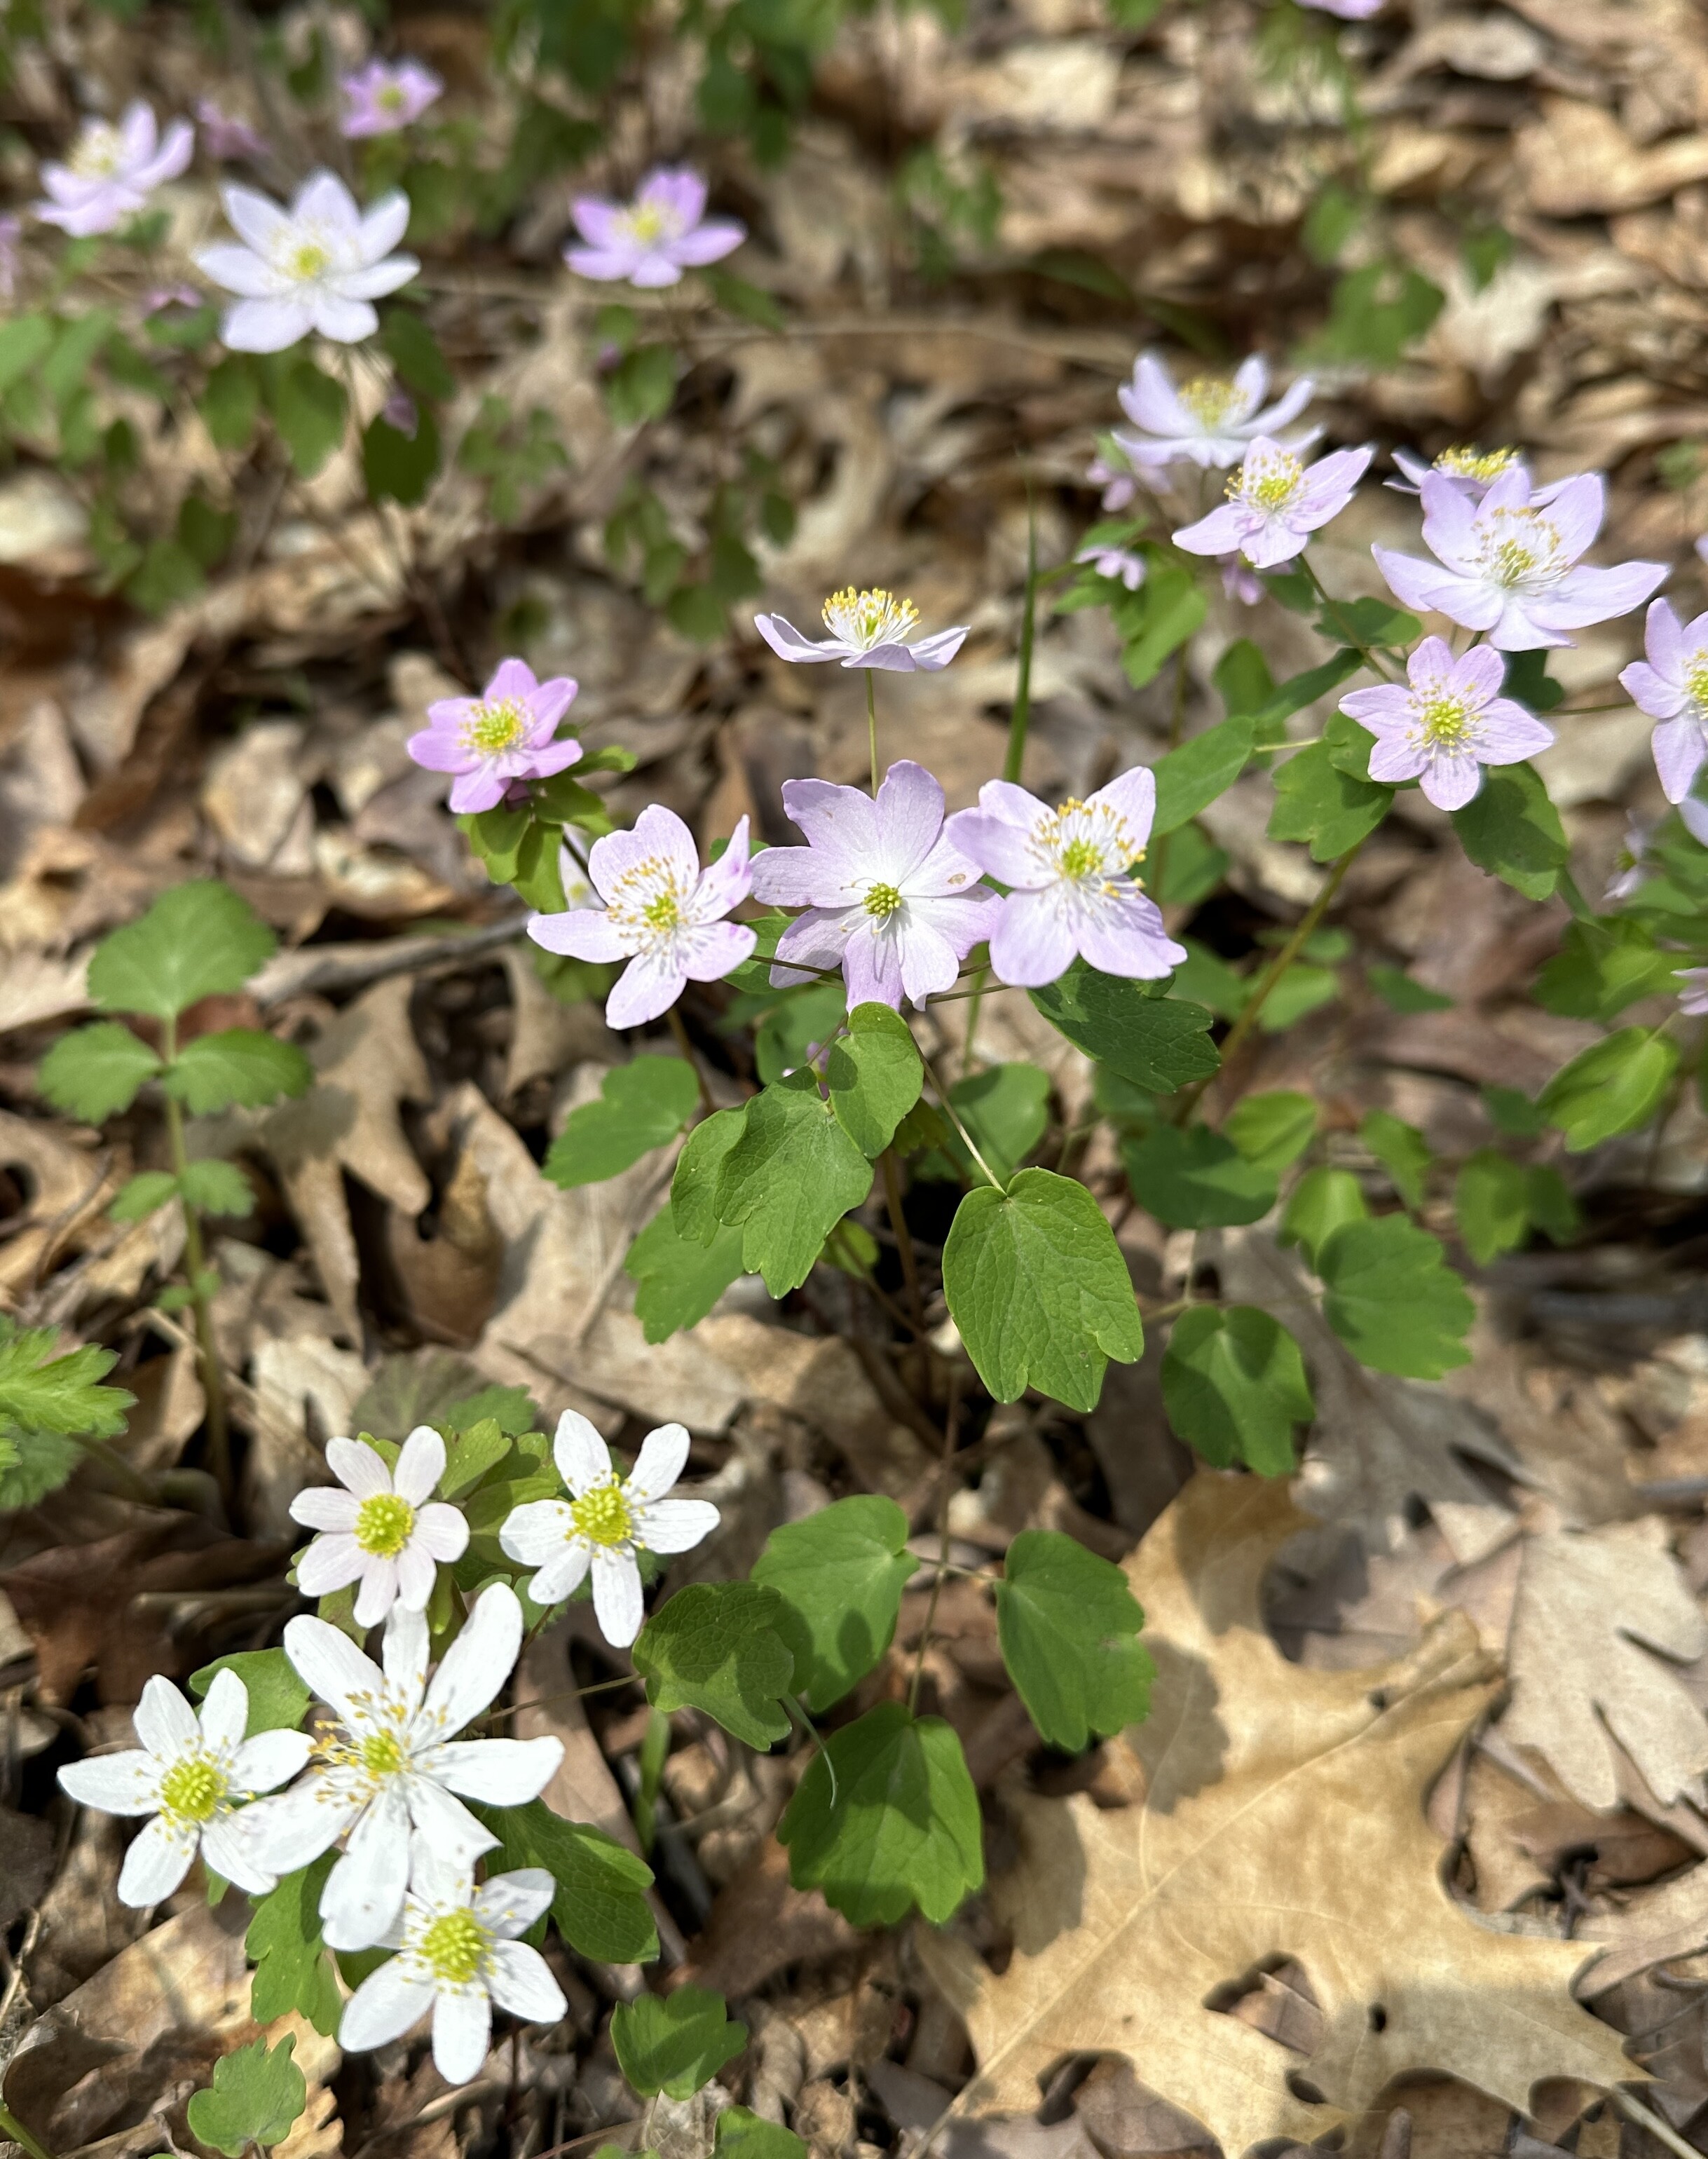 rue-anemone flowers blooming through a bed of brown leaves from last fall in La Lake Park, Woodbury